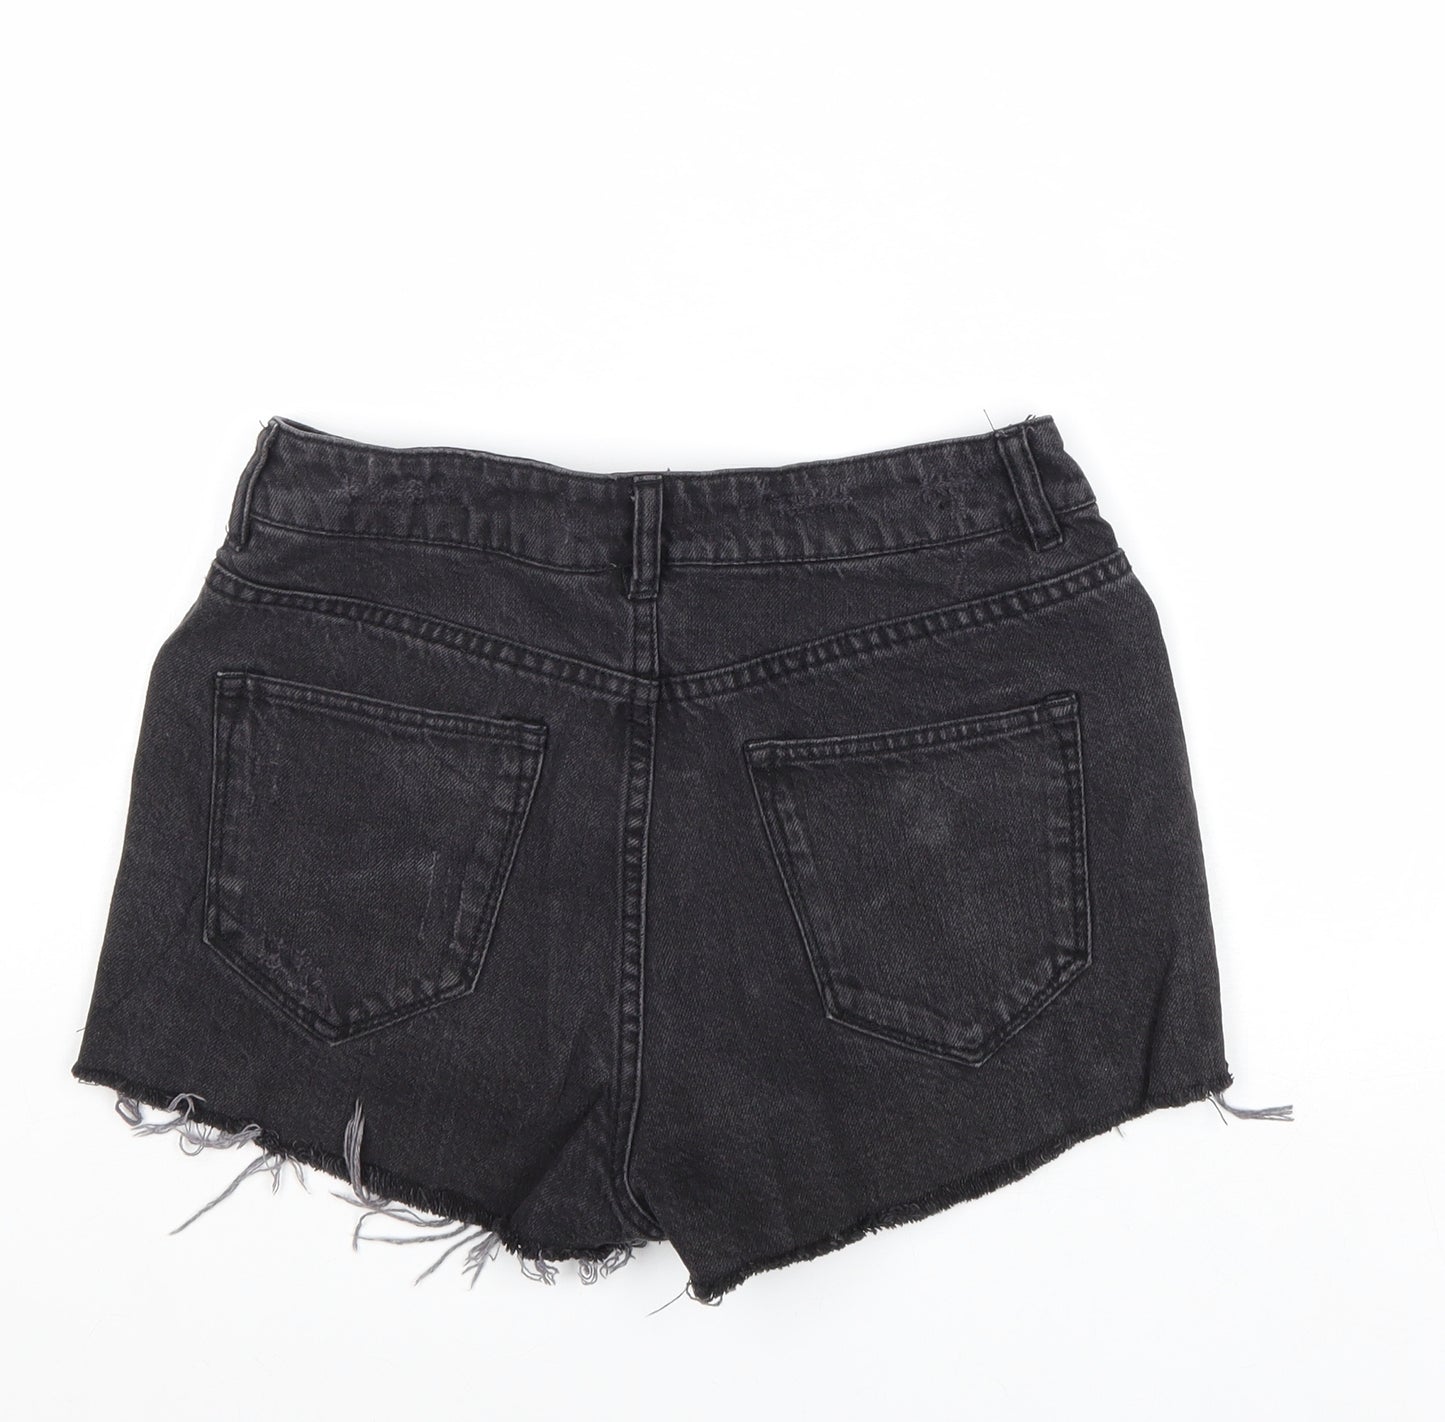 Divided by H&M Womens Black Cotton Cut-Off Shorts Size 8 Regular Zip